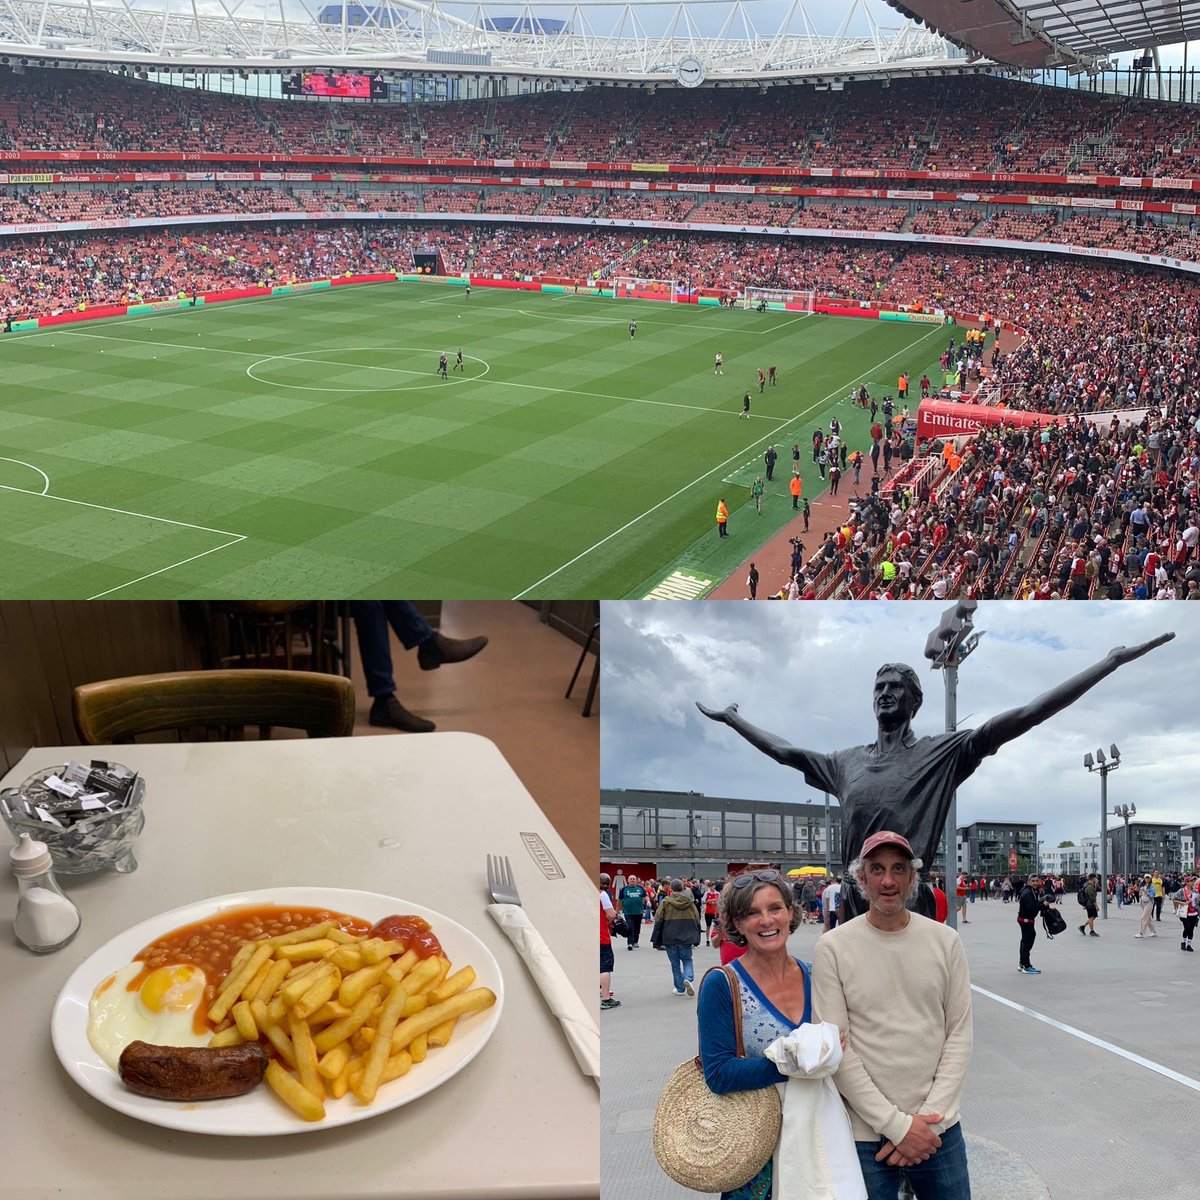 Disappointing 2-2 against Fulham. But what a stadium and what great chips at The Hope cafe. Richard Katz and Tony Adams topped the day off.